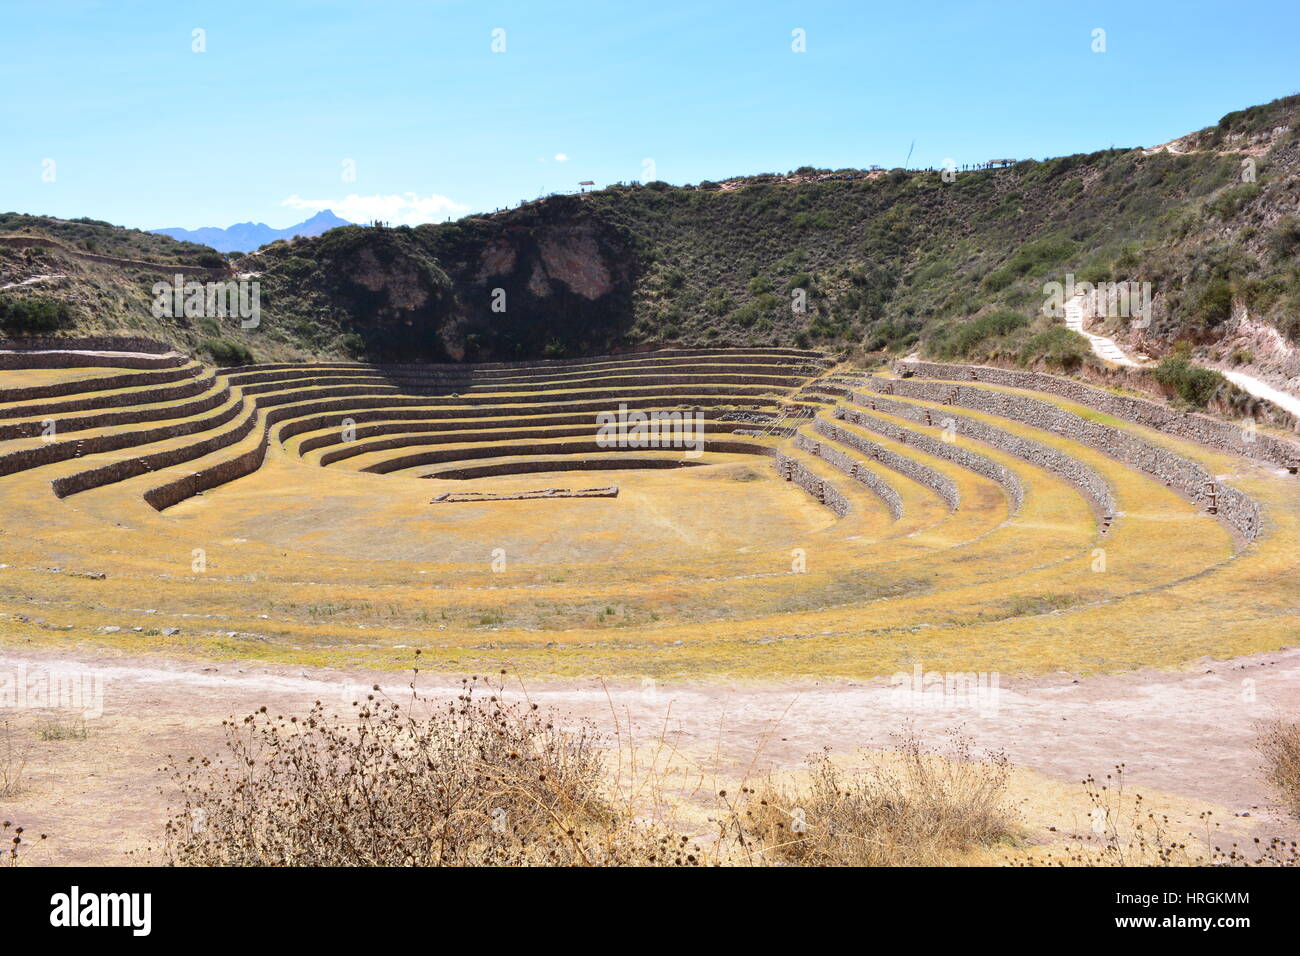 Picture of the Moray, an ancient havest center created by the Inca civilization, in Cusco, Peru Stock Photo